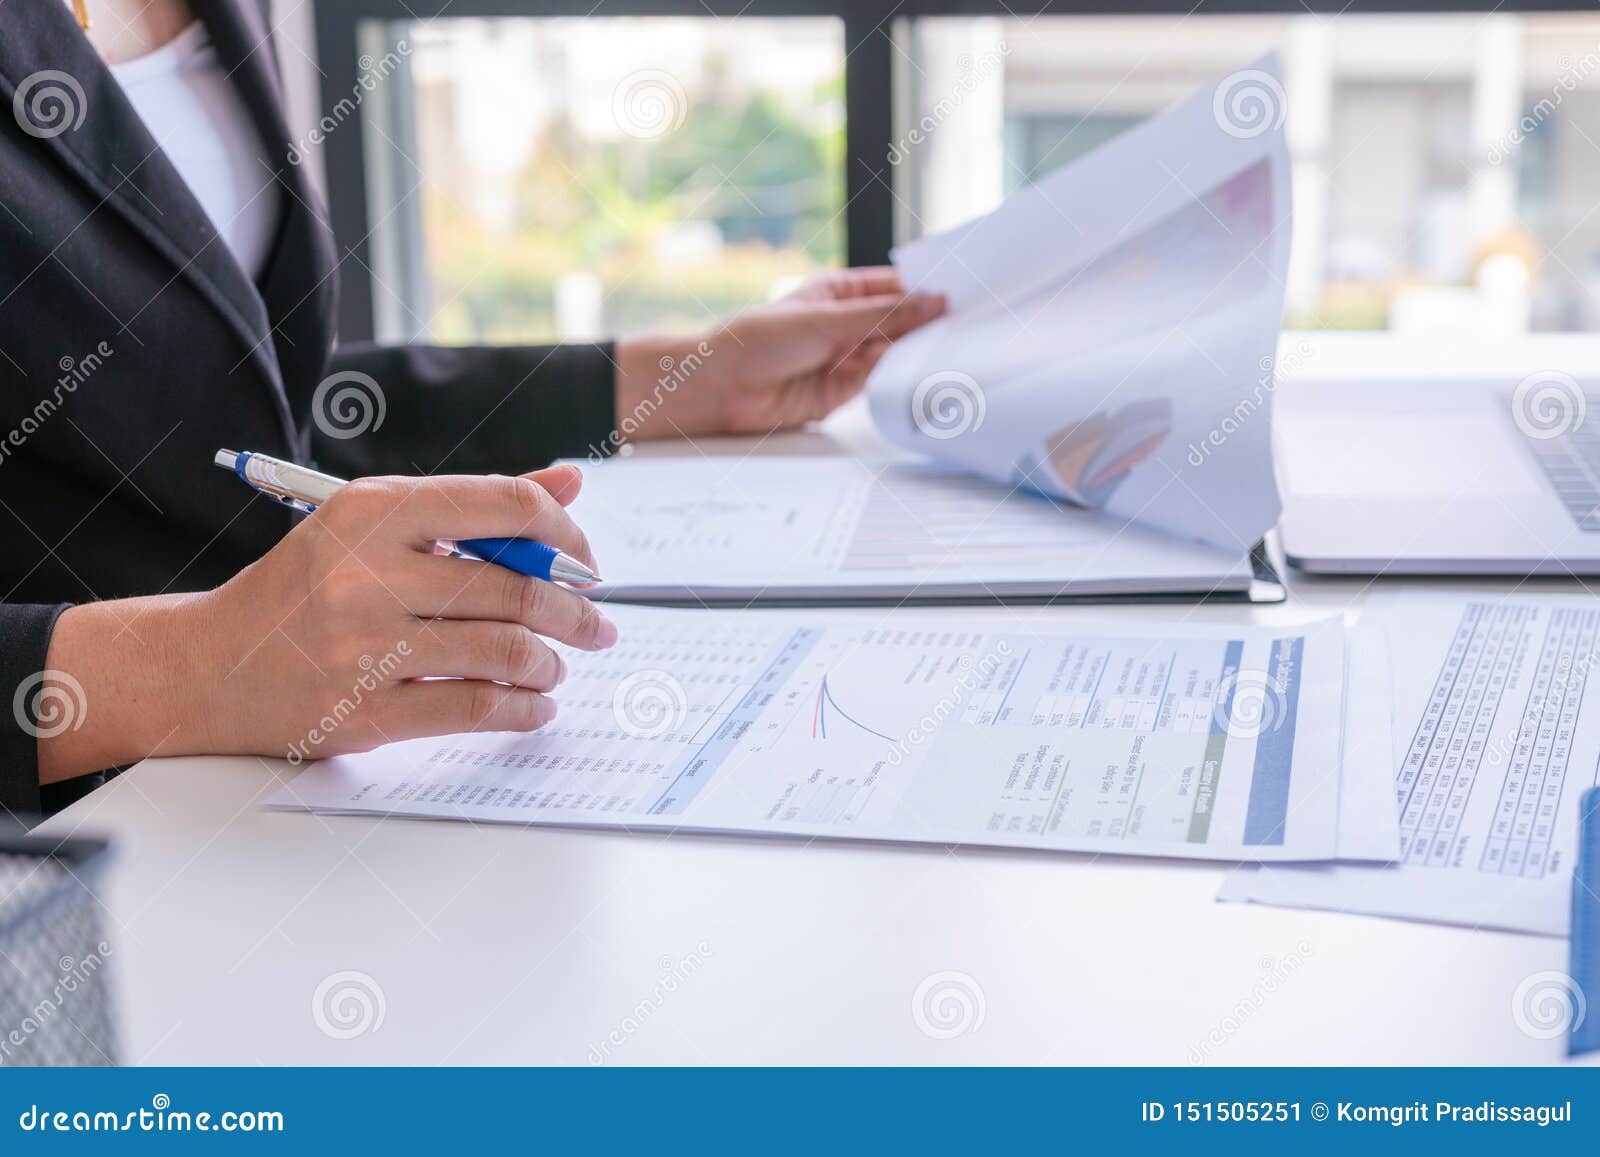 businessman analysis comparing financial reports